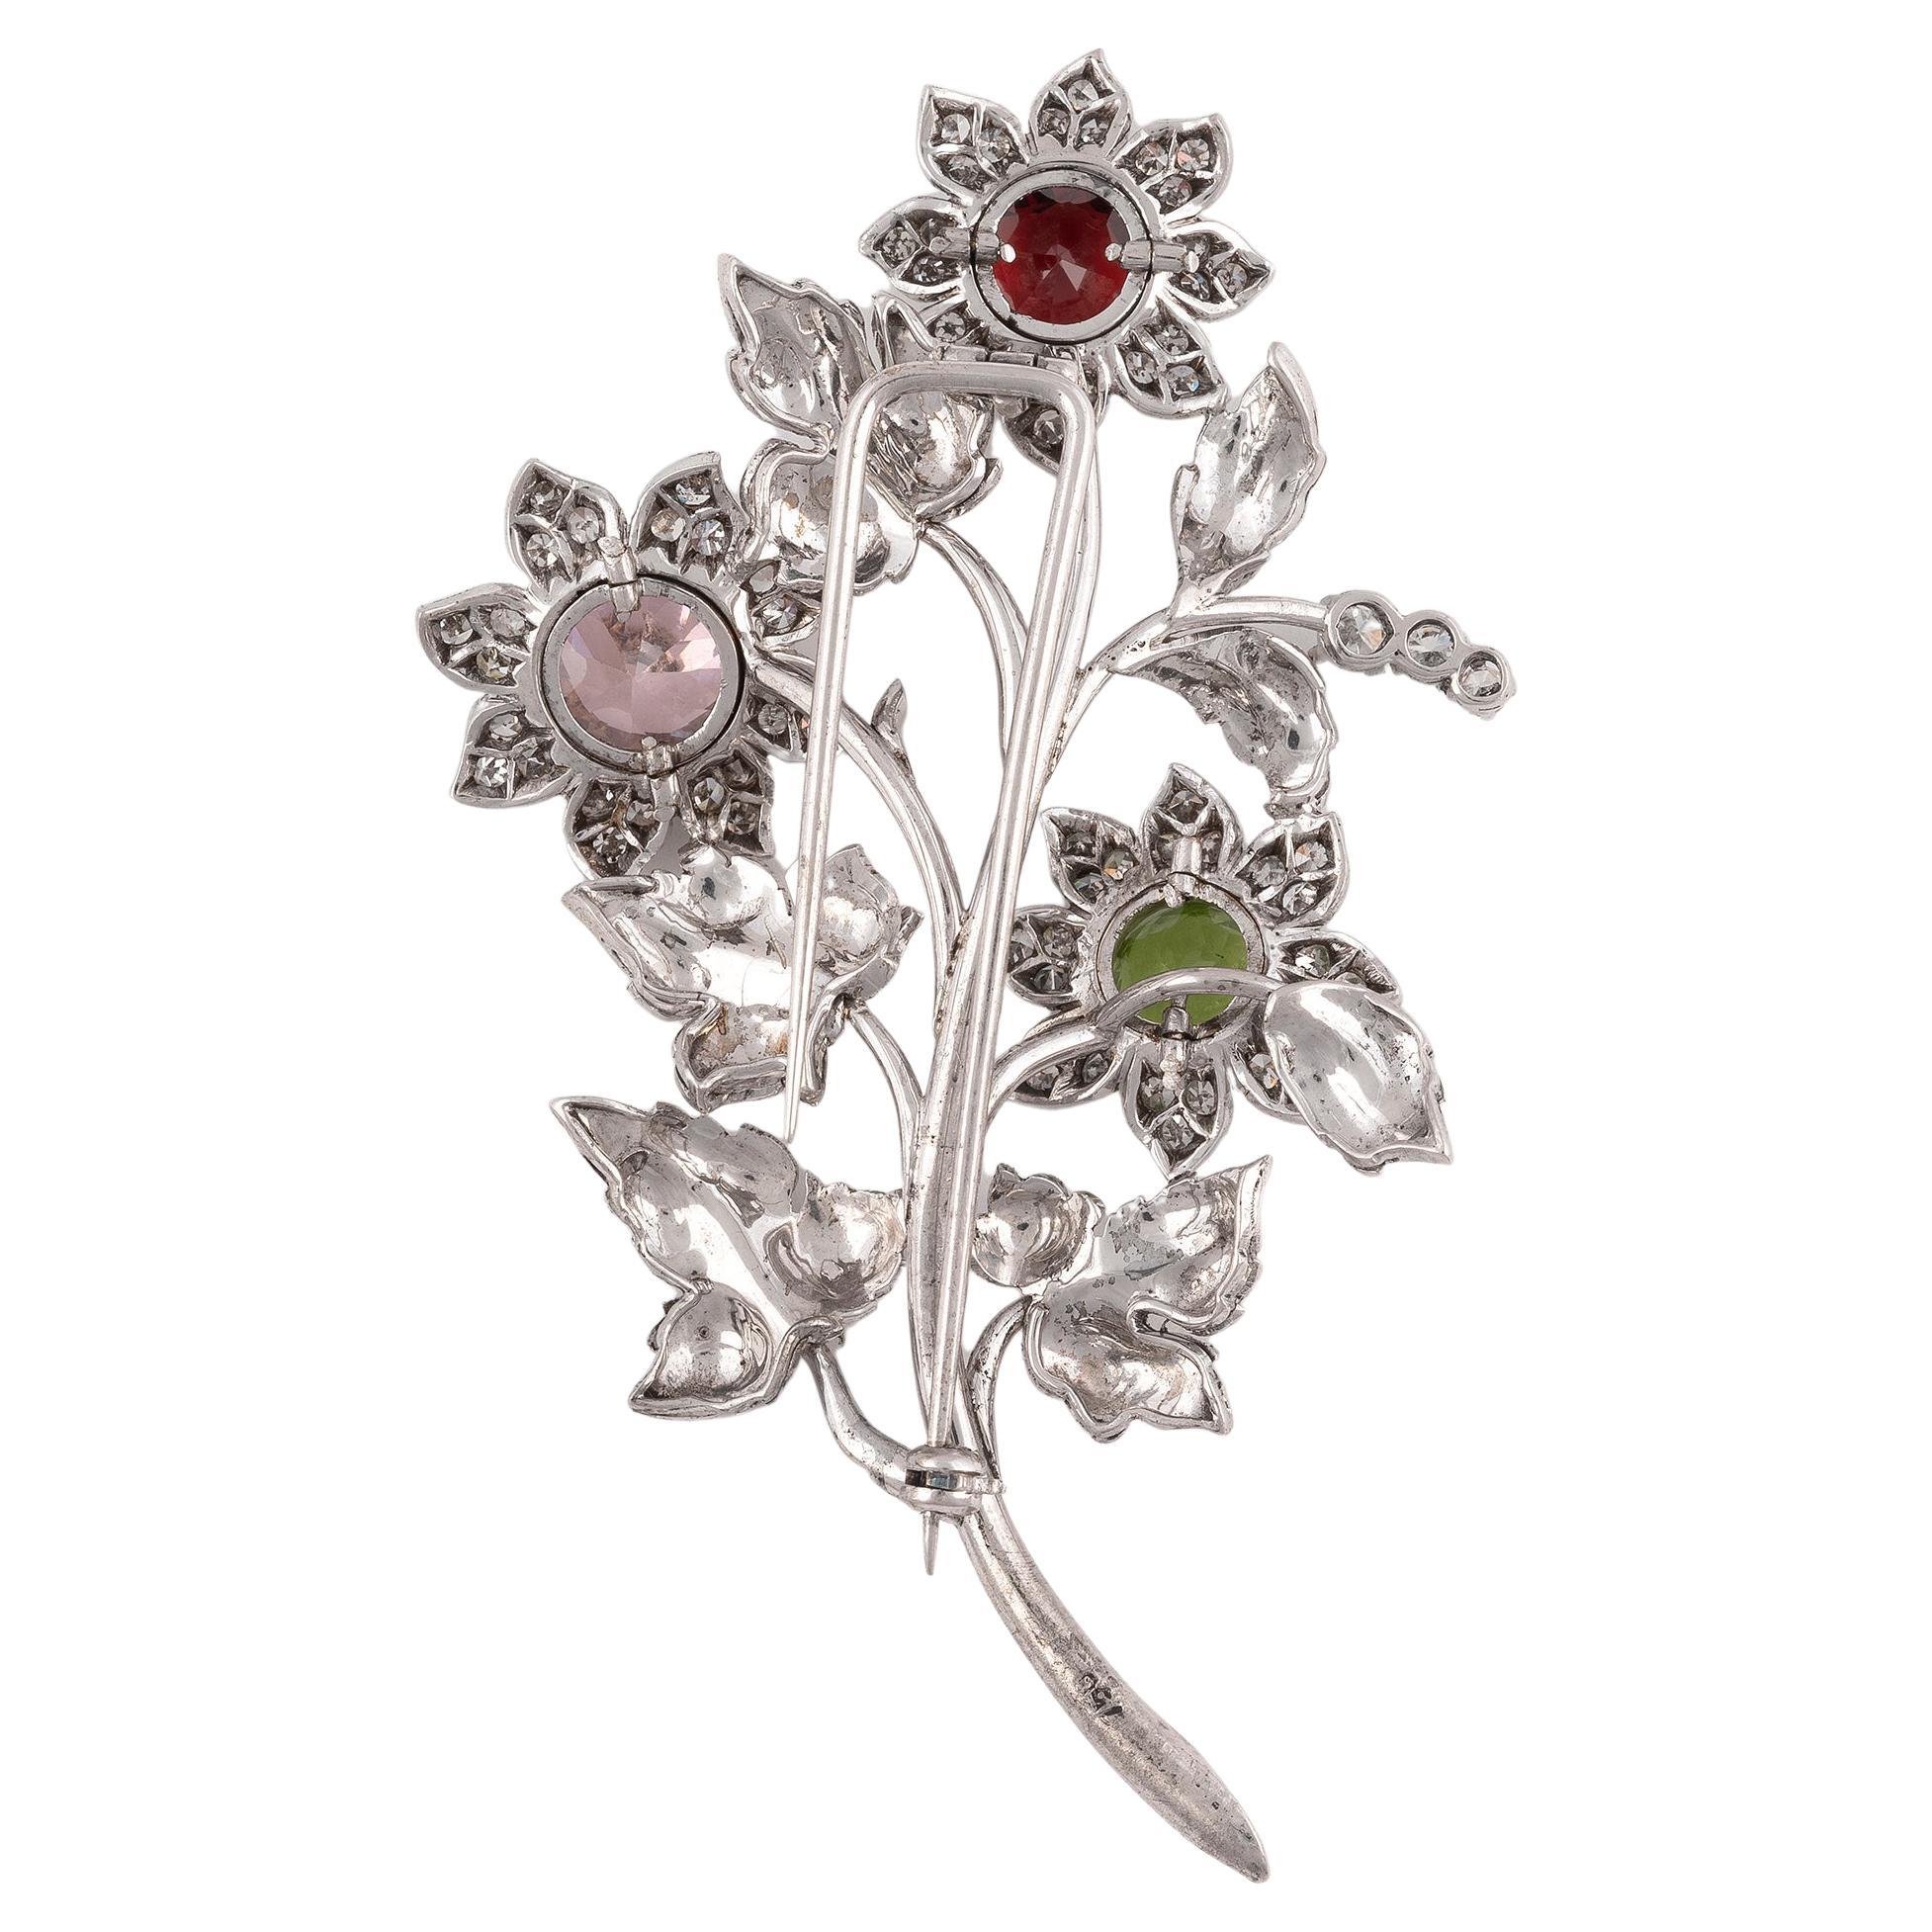 

Of bouquet motif, each yellow gold flower head centered by a rubellite, peridot and pink quartz, framed by petals pavé-set with round brilliant-cut diamonds, the white gold stems accented by bi-color gold leaves, set with round brilliant-cut